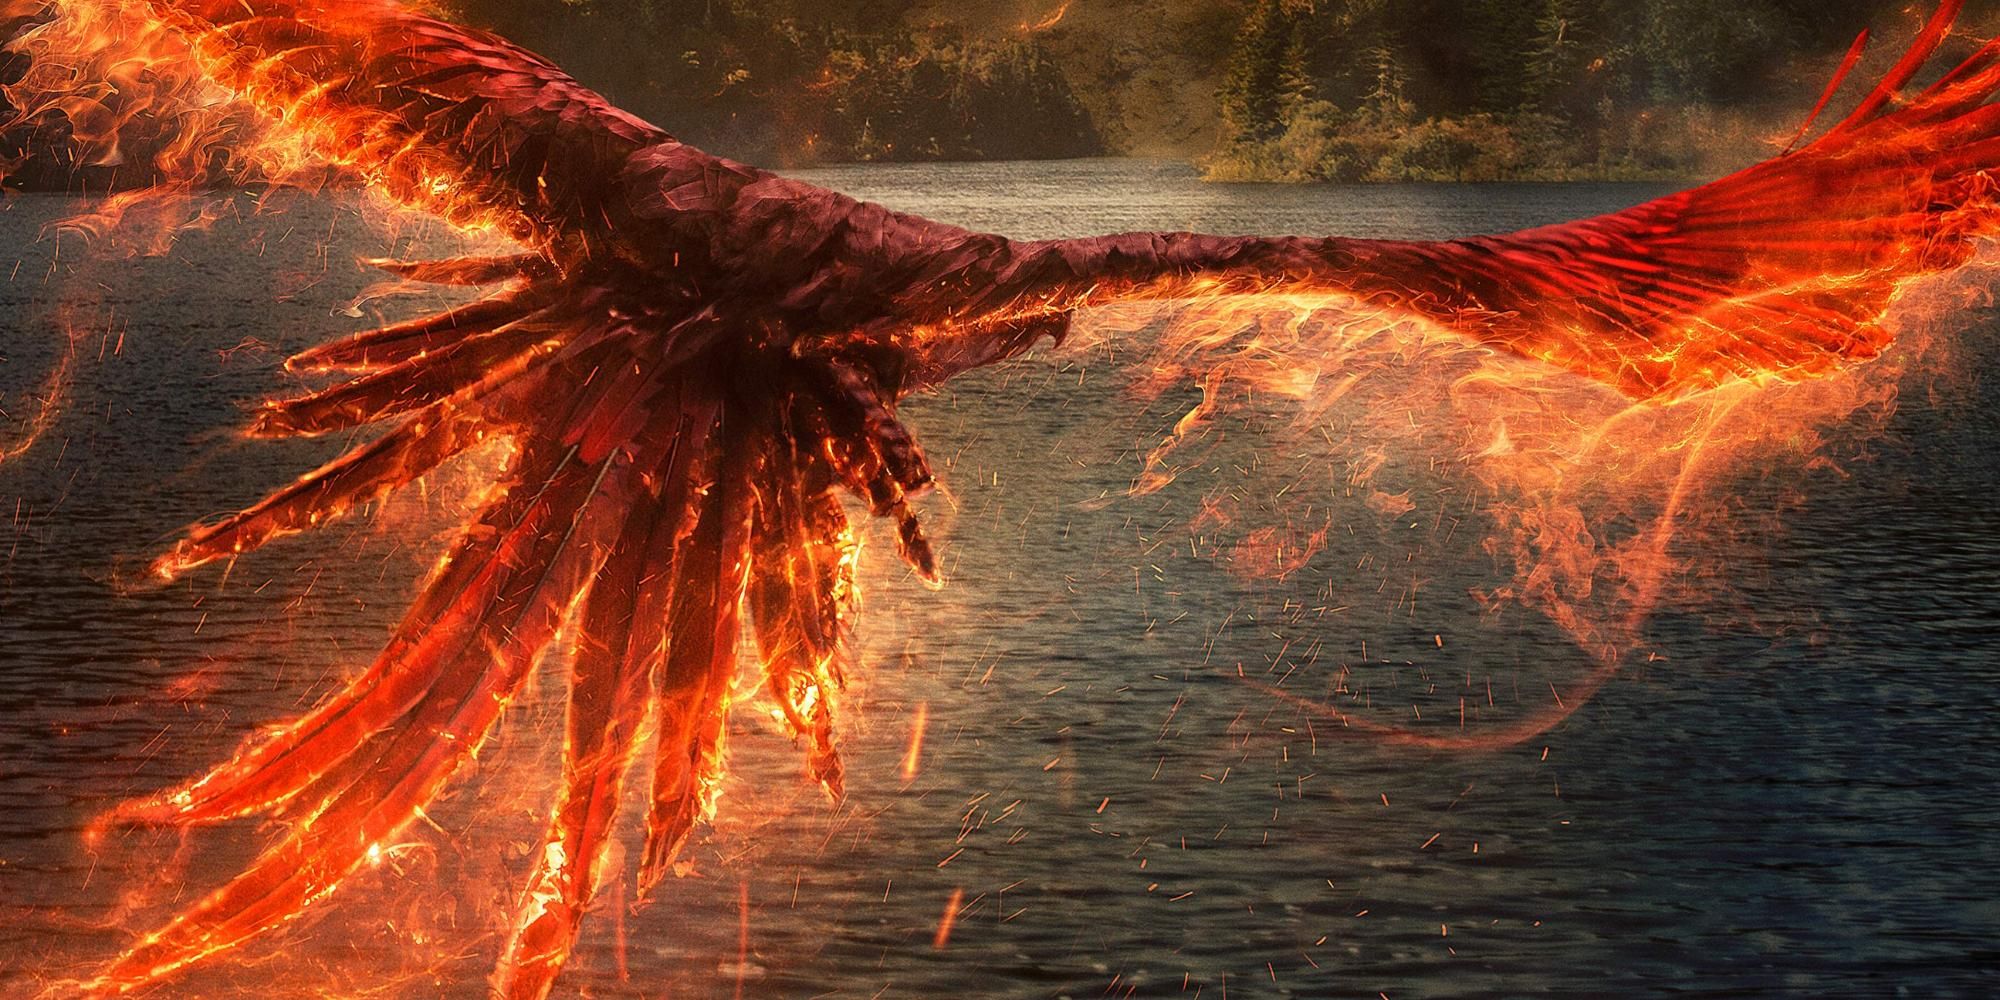 Fawkesflying across a lake on fire in Fantastic Beasts Secrets of Dumbledore Poster